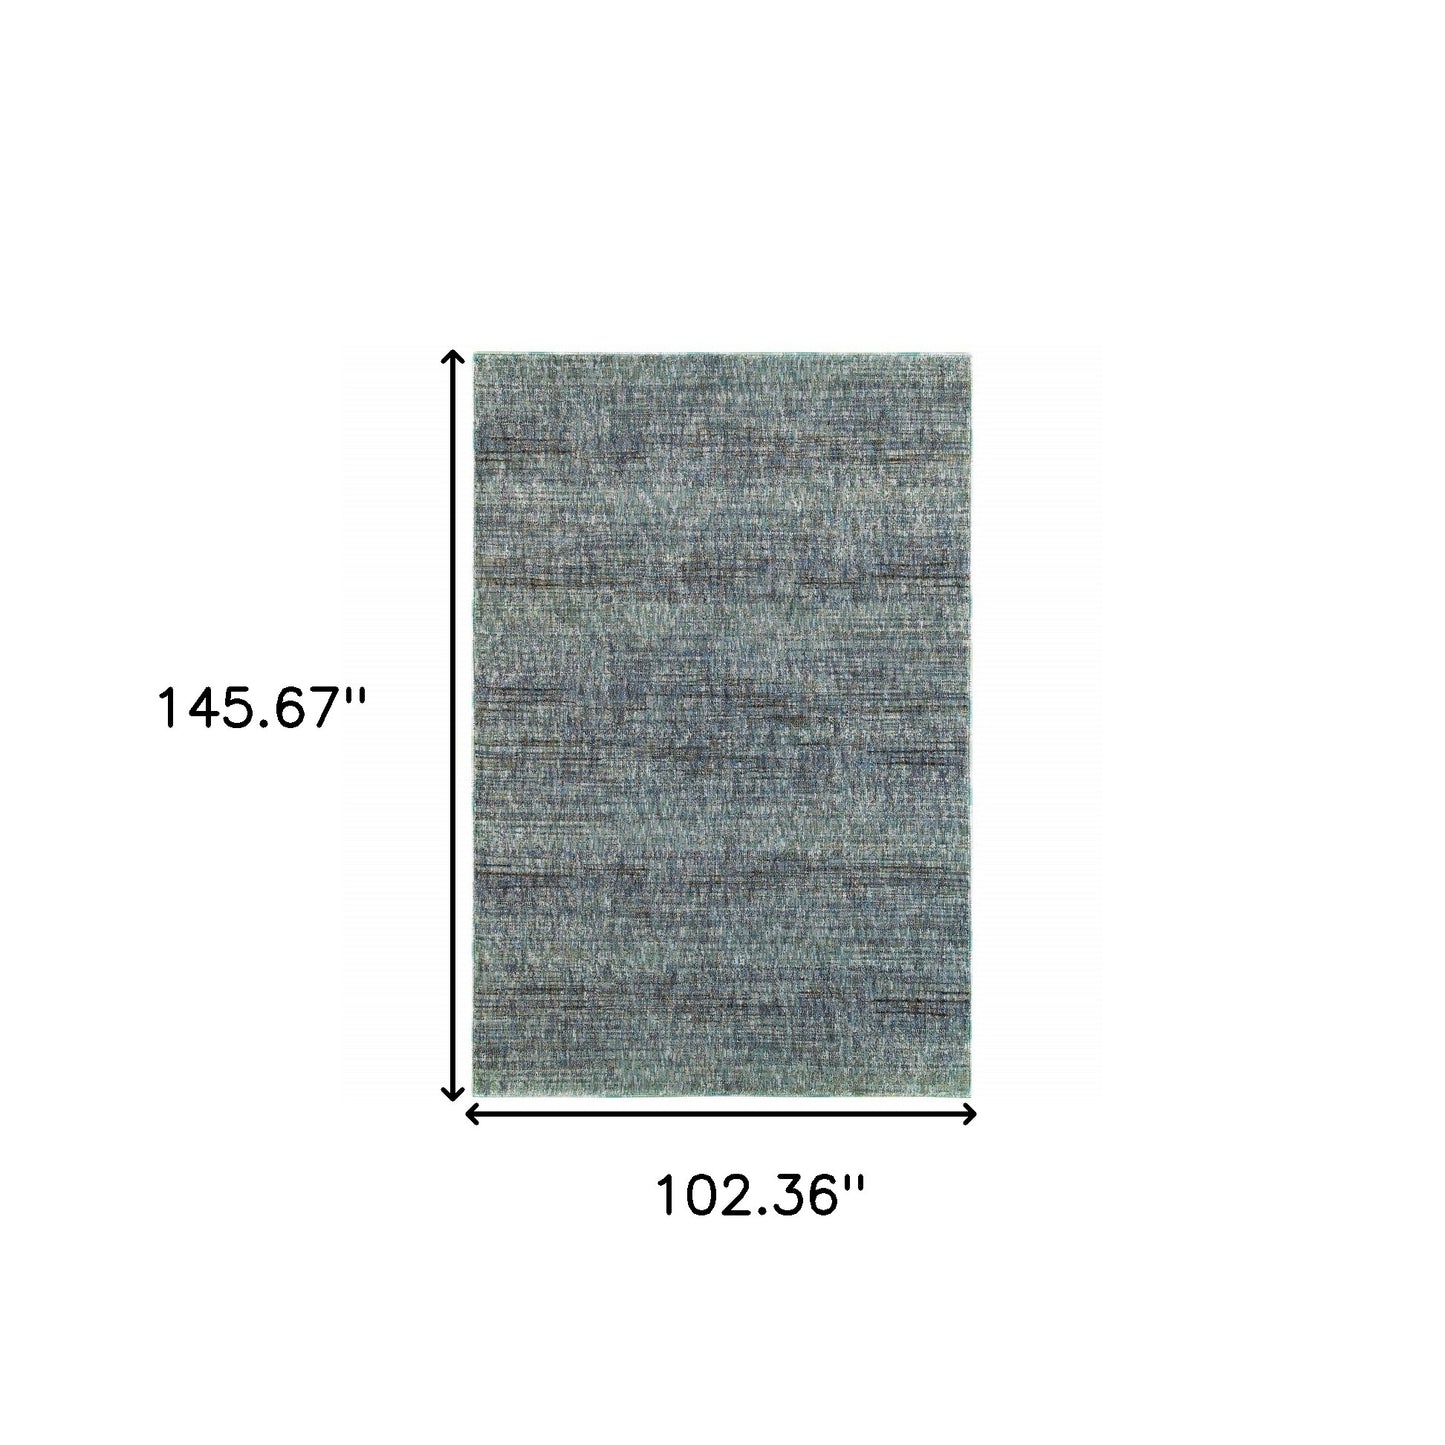 9' x 12' Blue and Gray Power Loom Area Rug